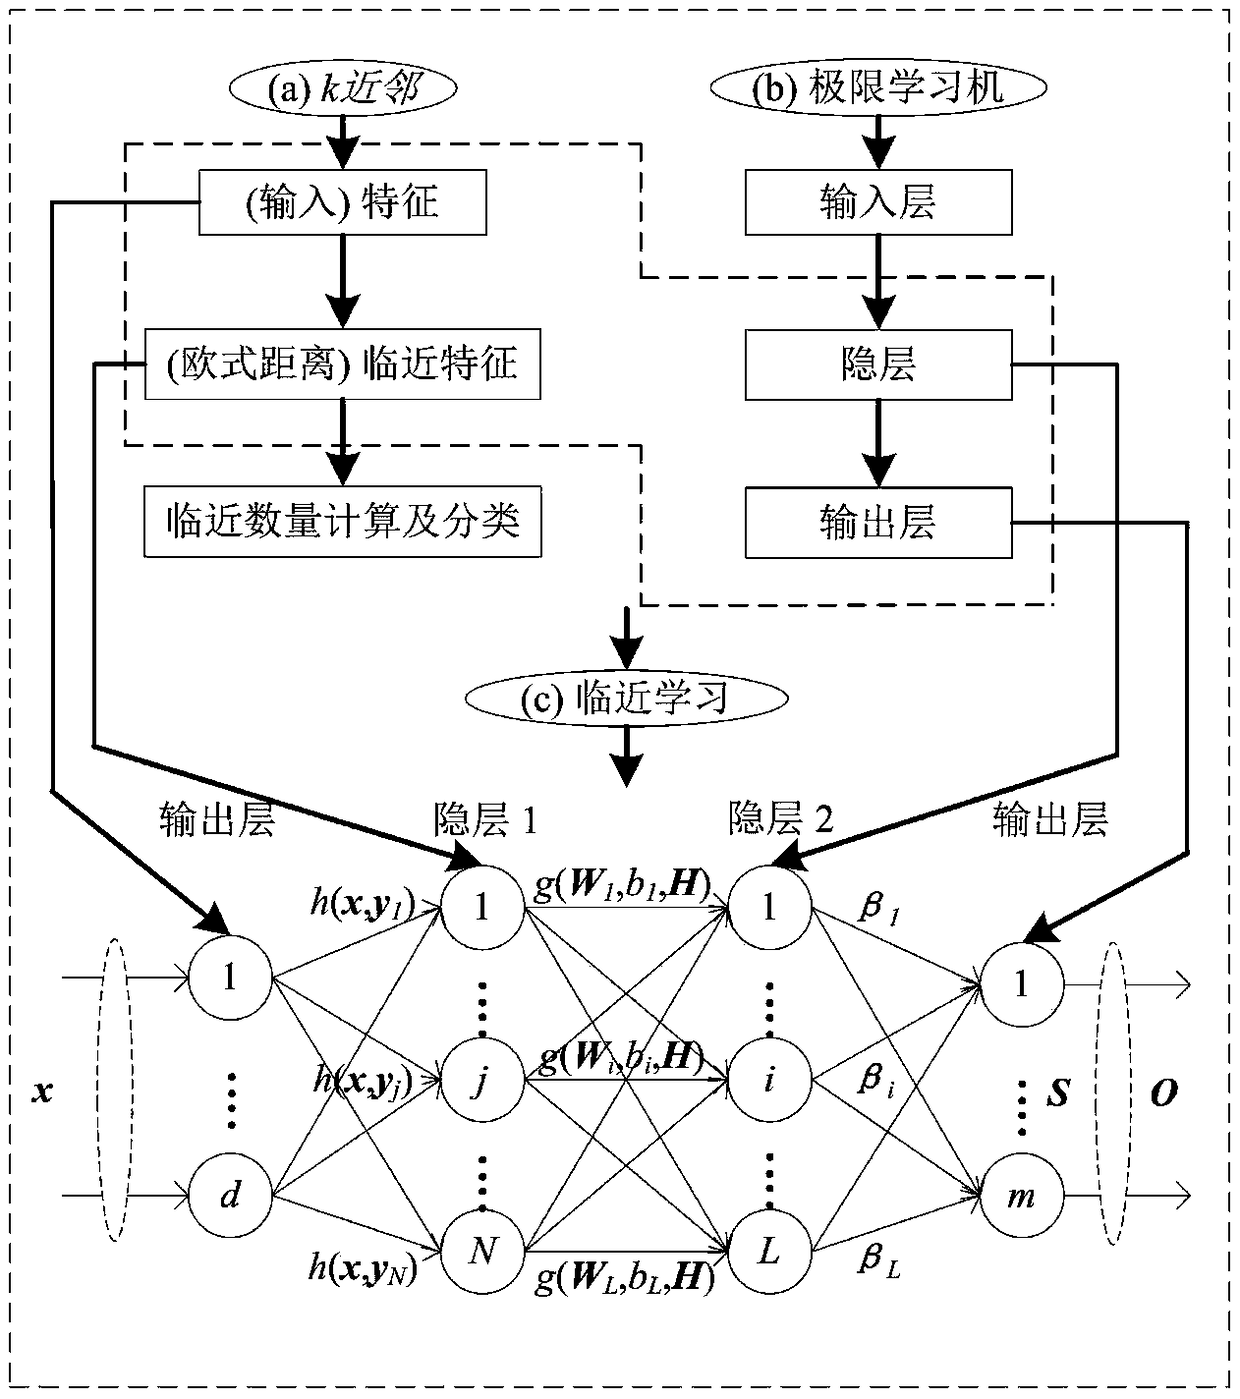 A distance mapping pattern classification method